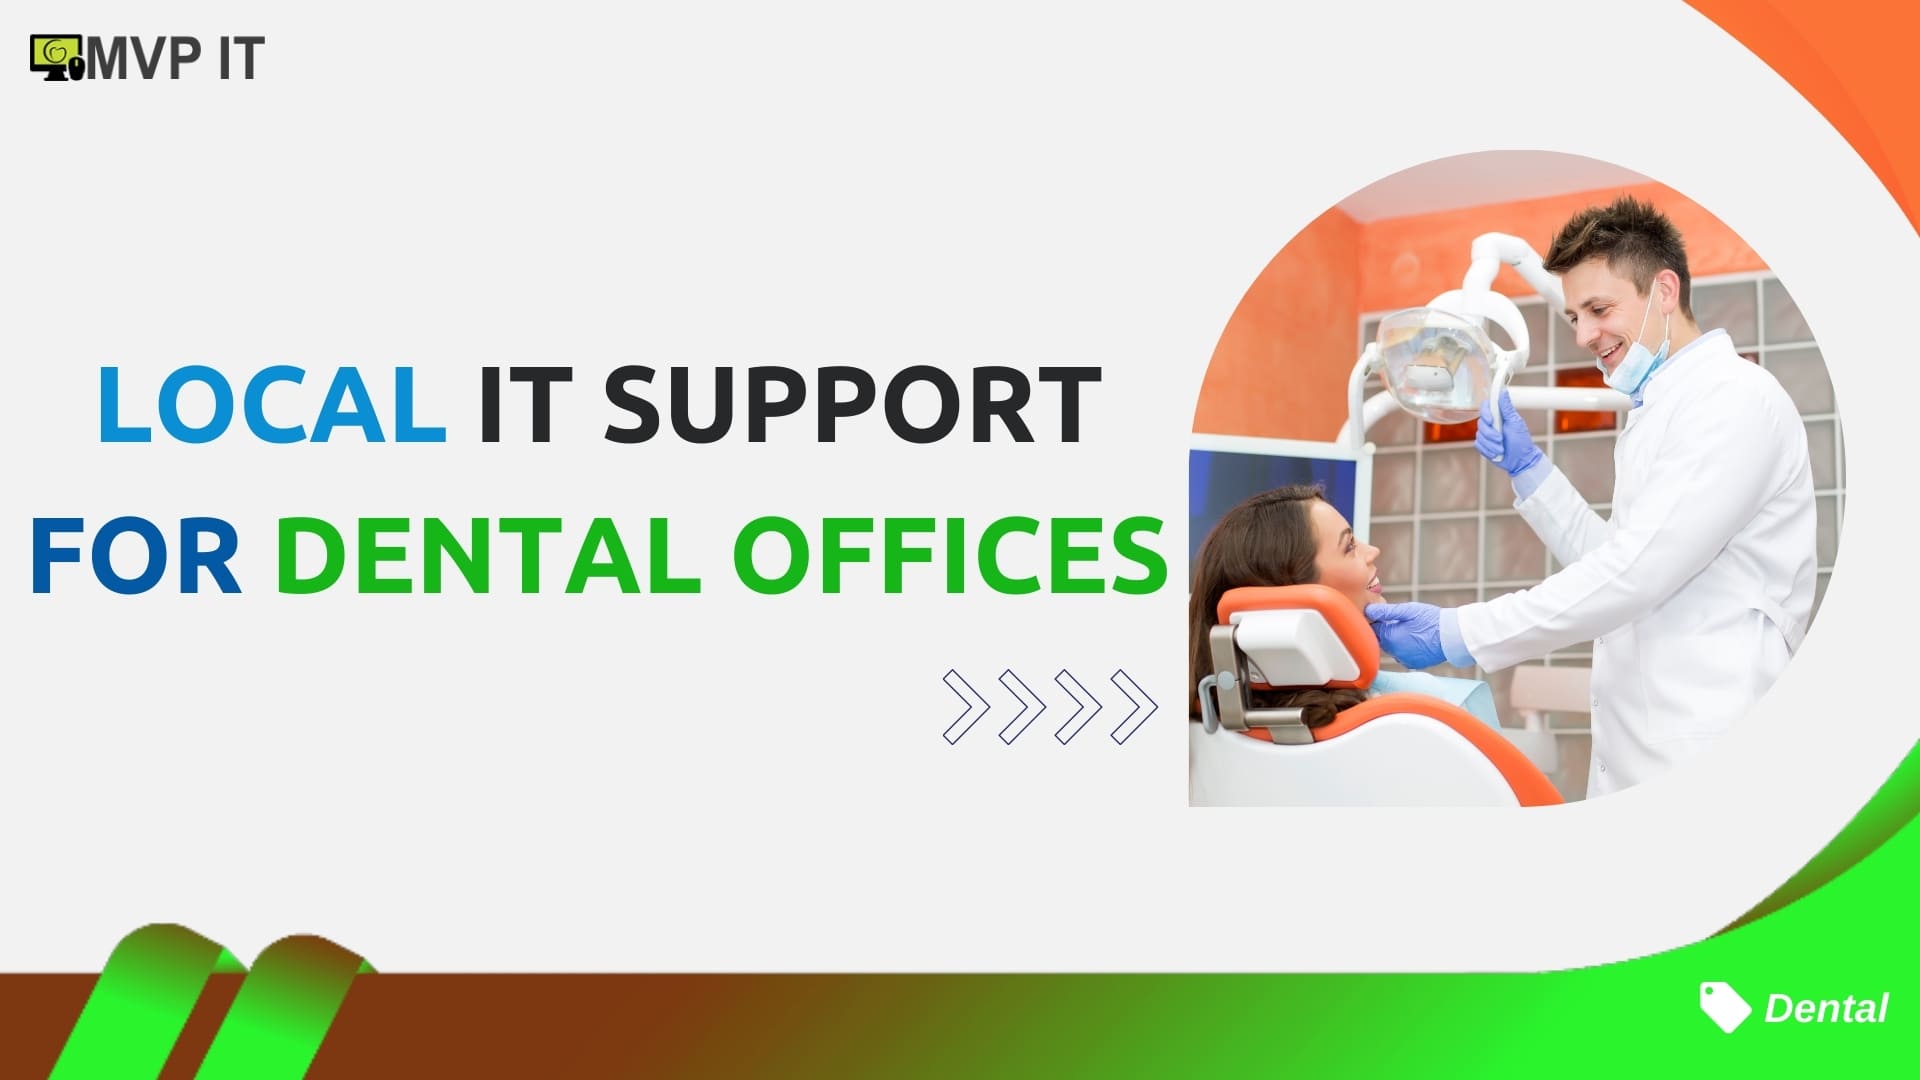 Local IT Support for Dental Offices